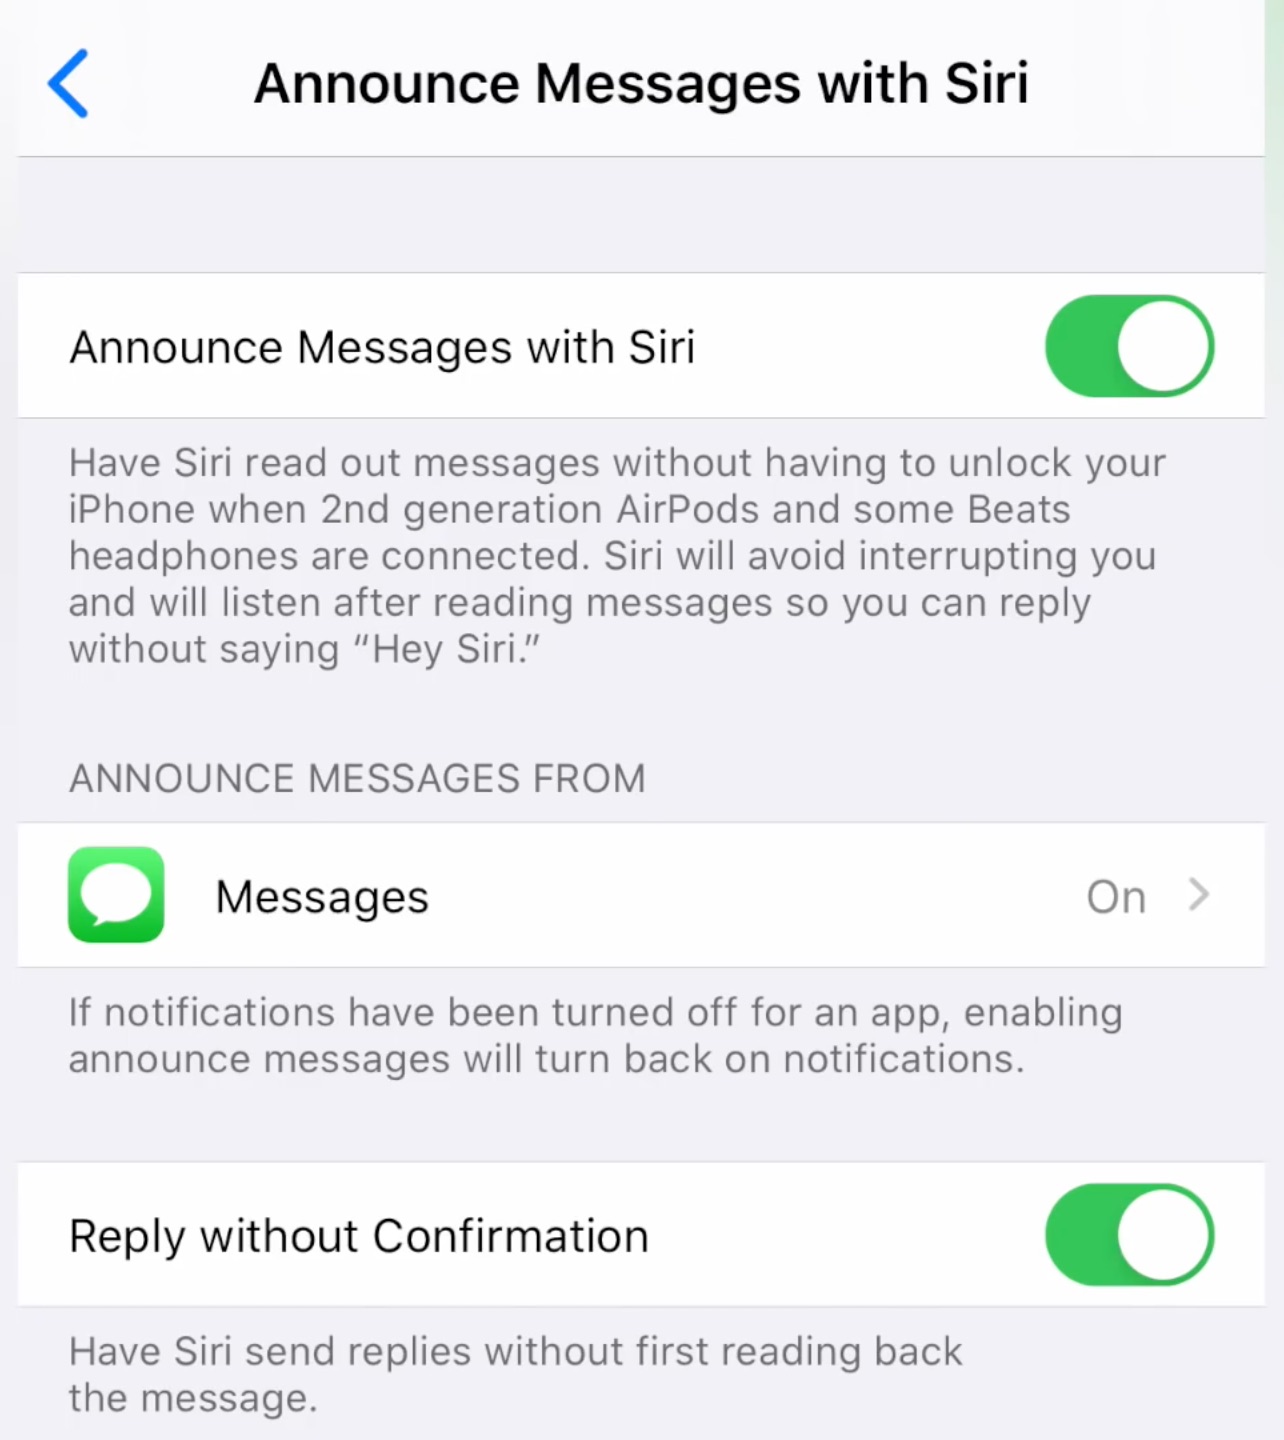 iOS 13.2 features tutorial: Announce Messages with Siri